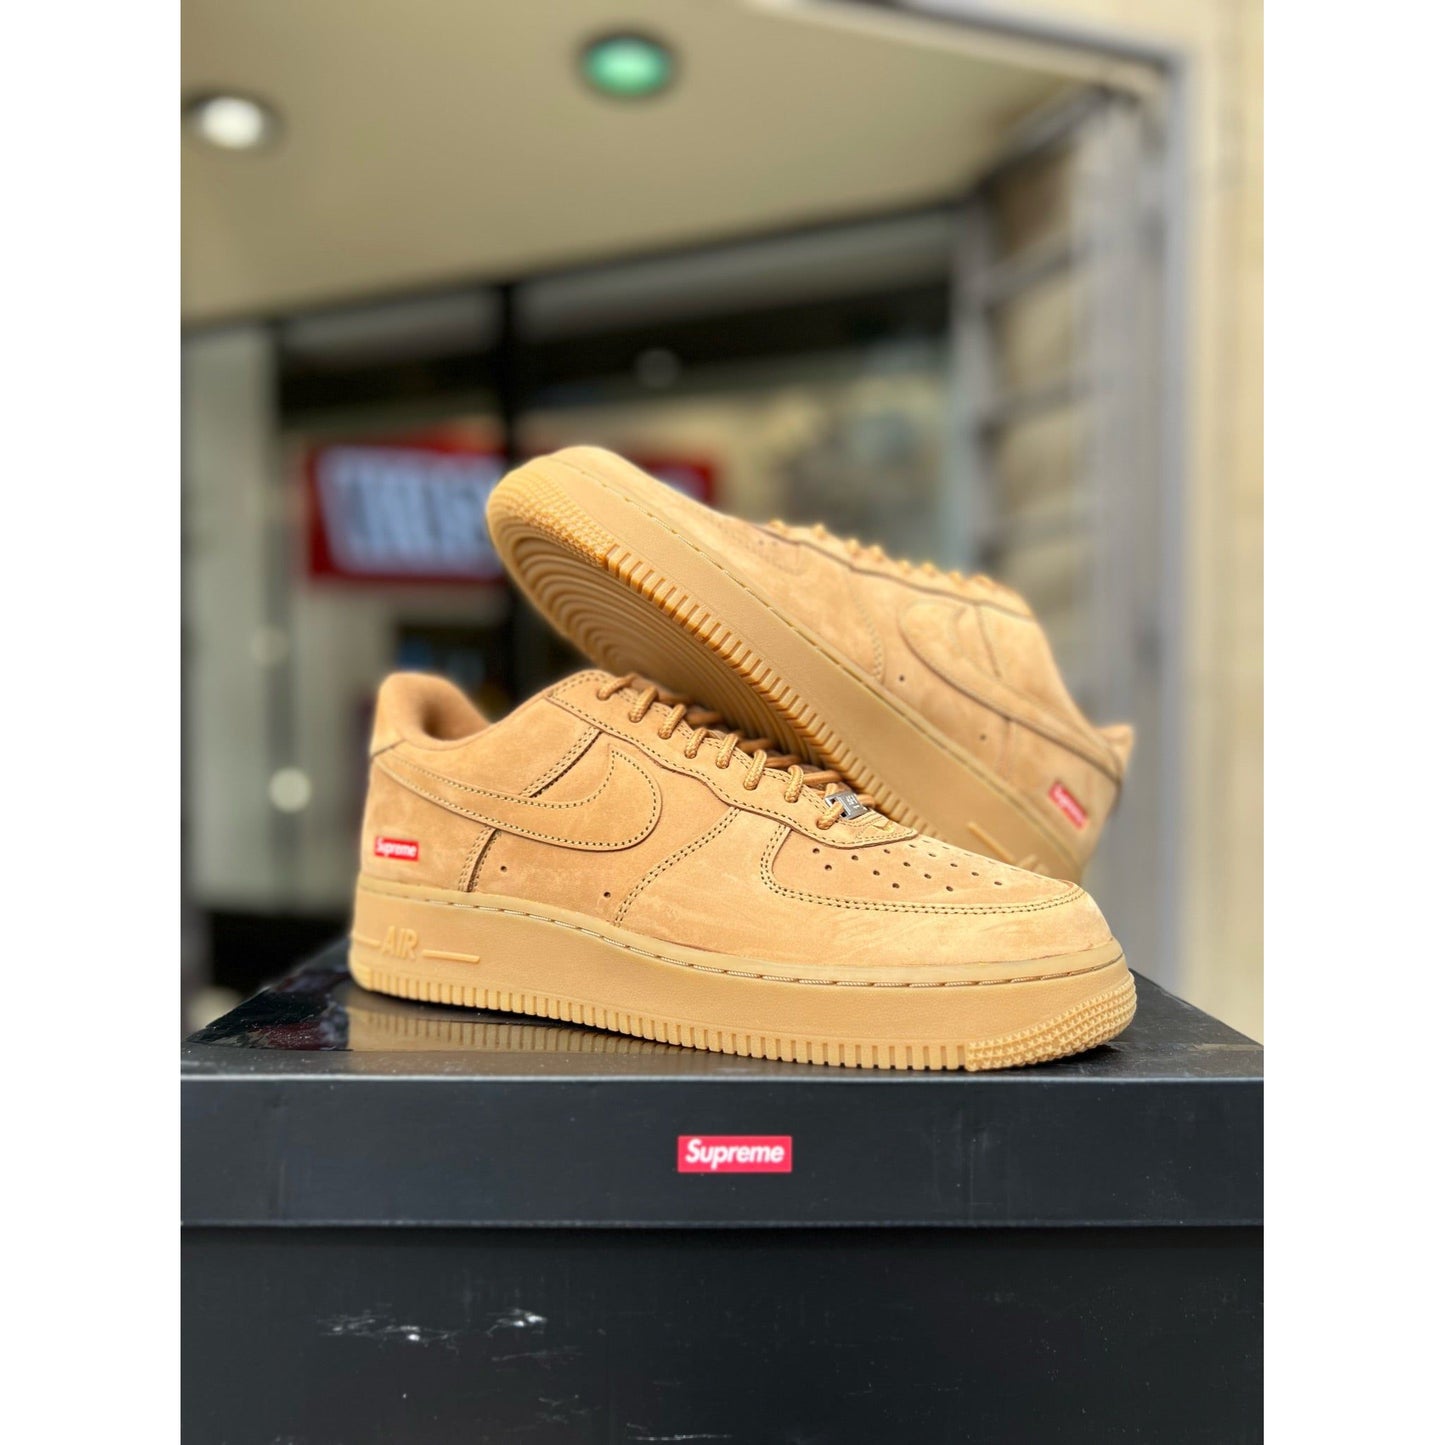 Nike Air Force 1 Low SP Supreme Wheat from Nike